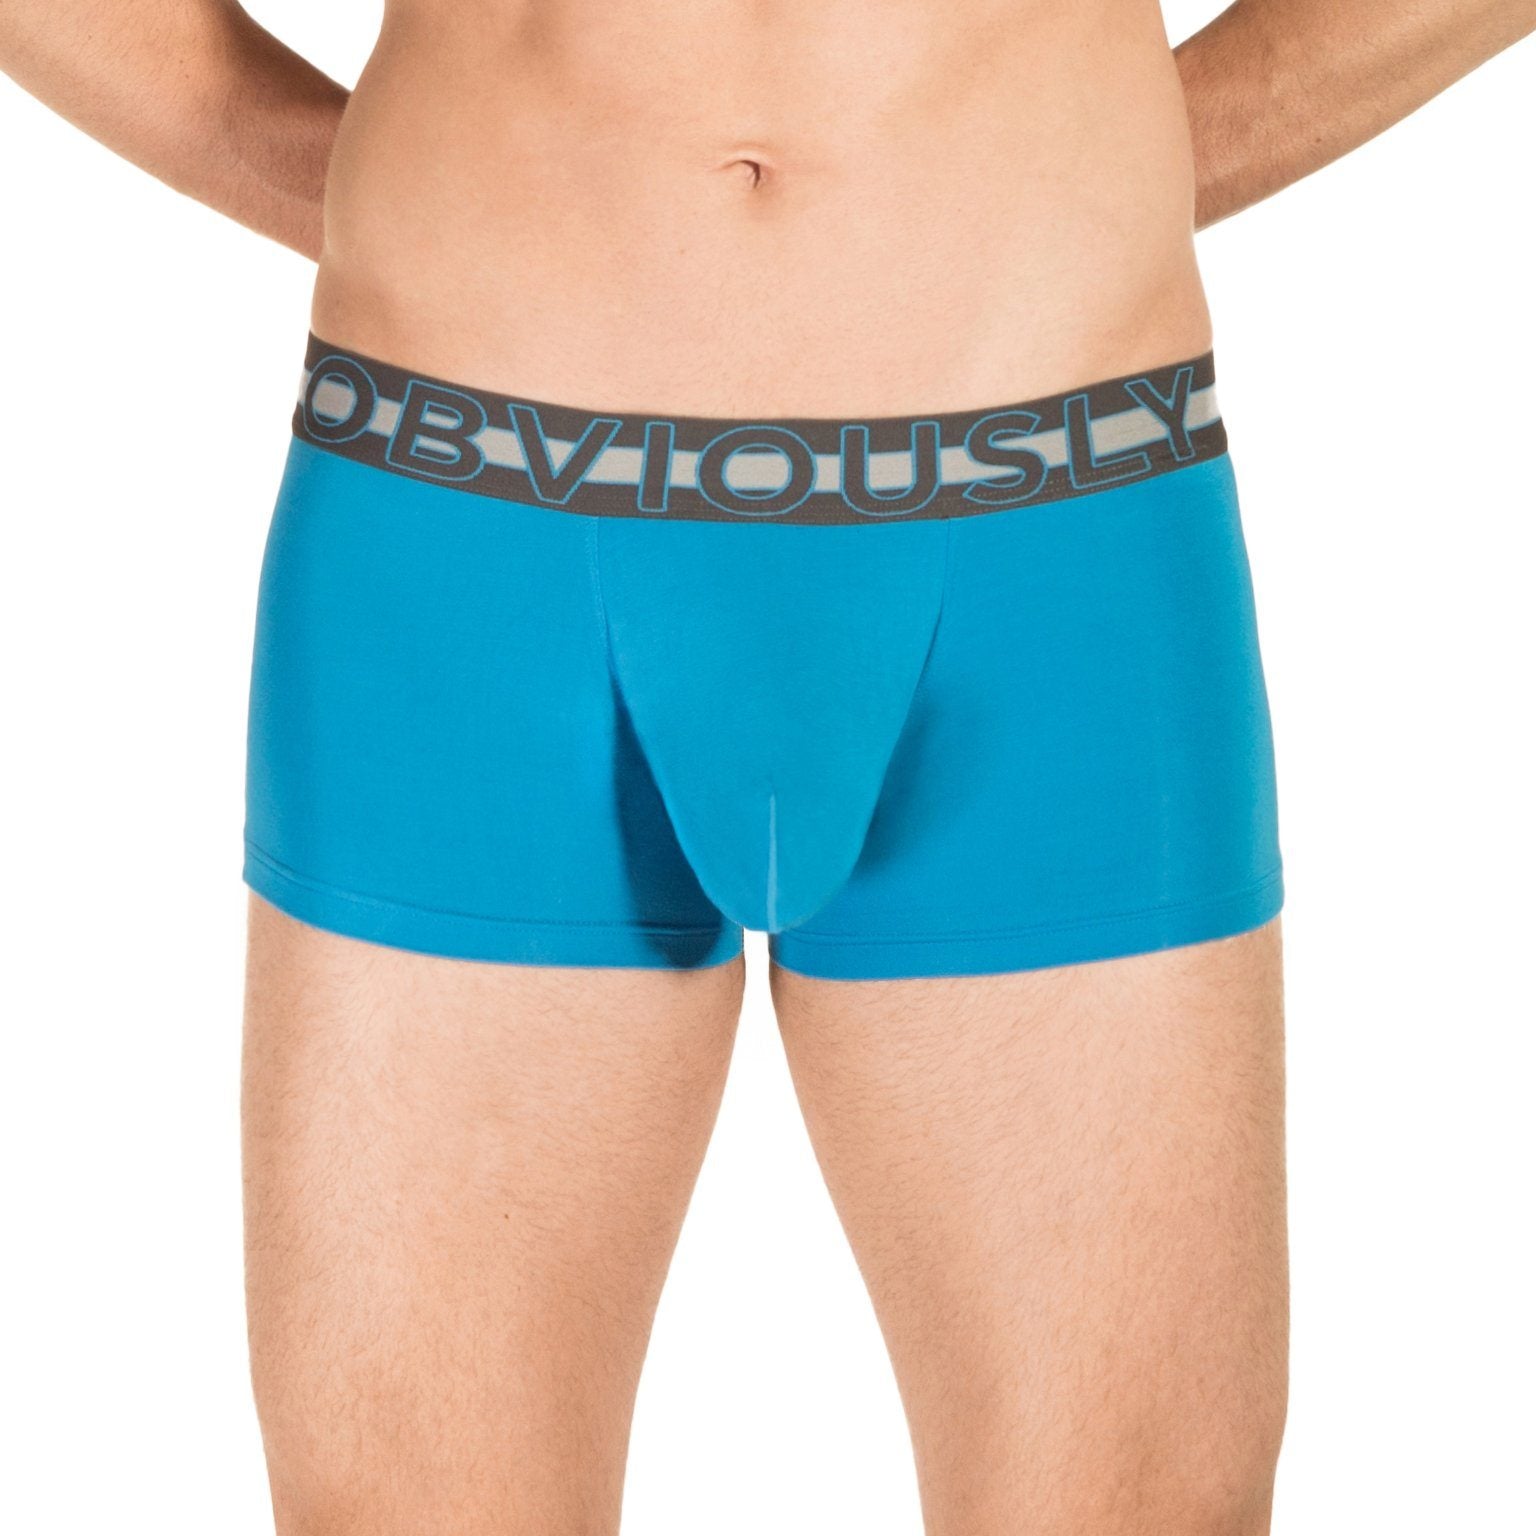 Obviously EveryMan AnatoMAX Trunk LARGE pouch for BIG guys Short Underwear